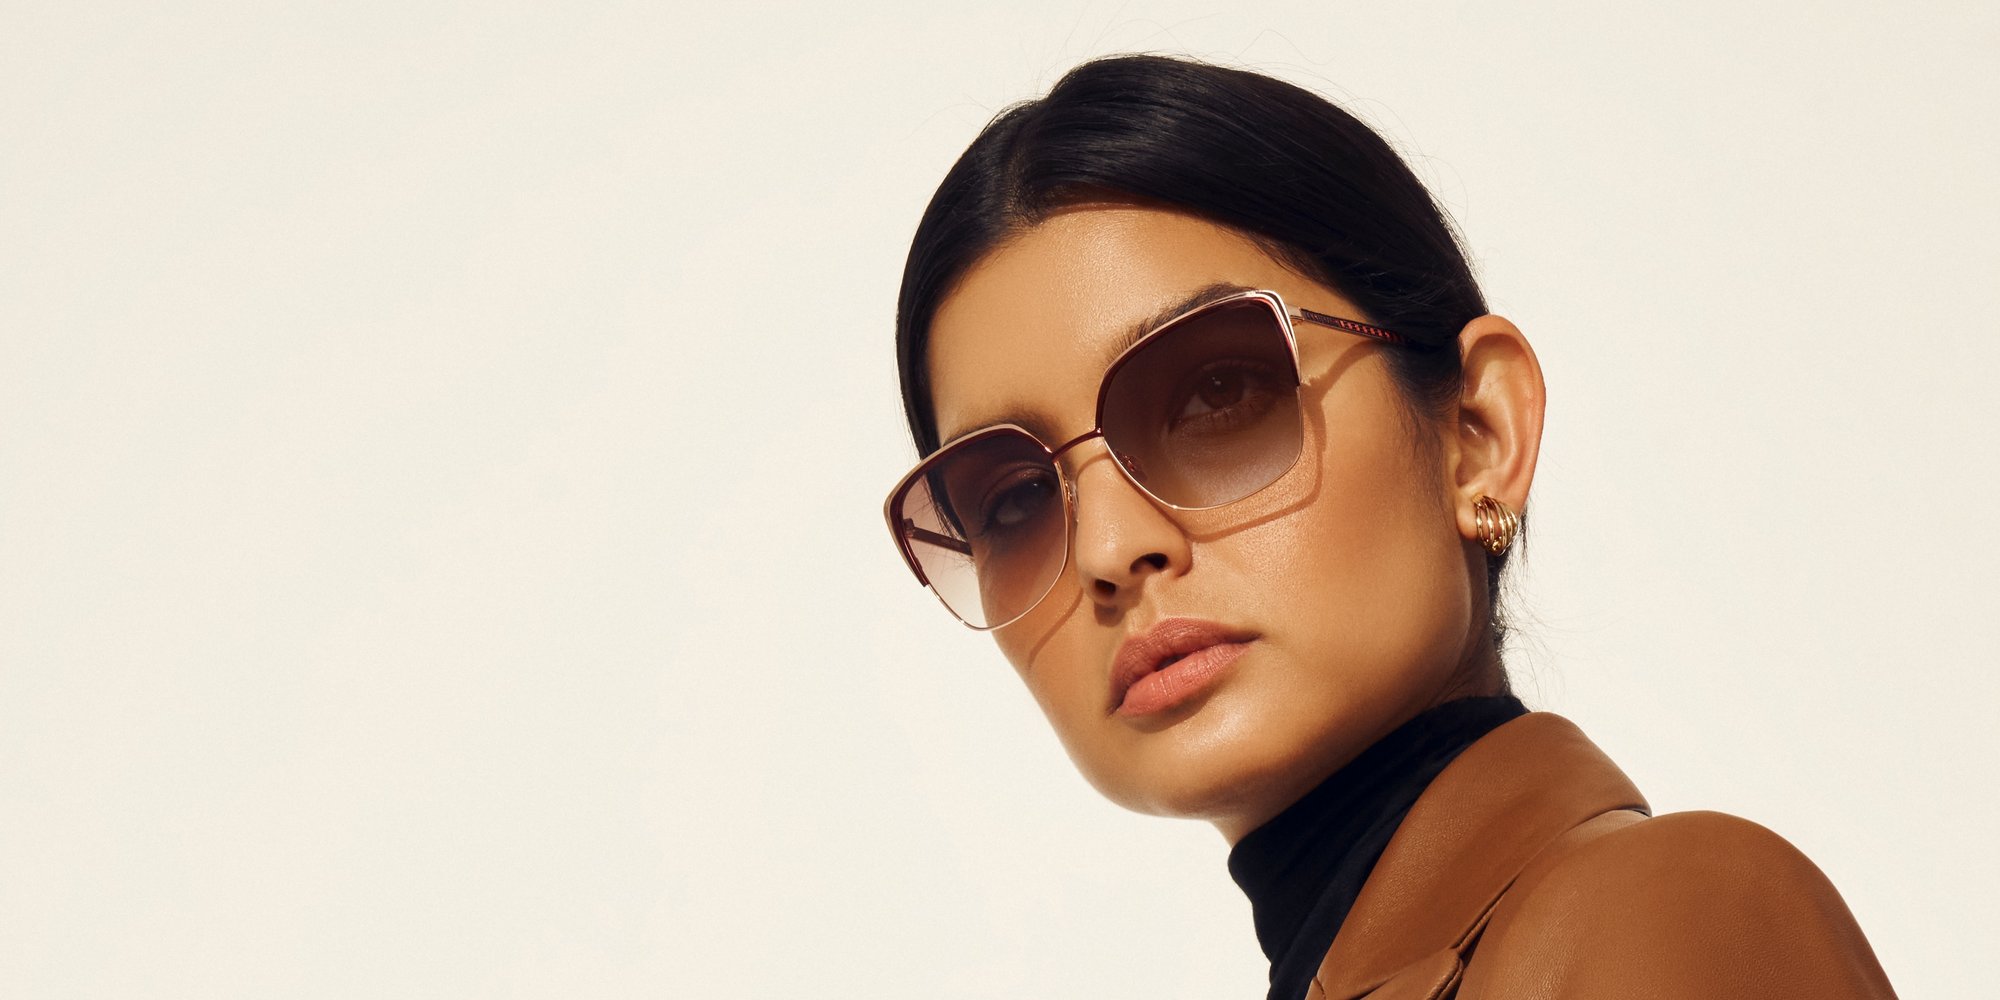 Anne Klein model in brown leather jacket and oversized sunglasses